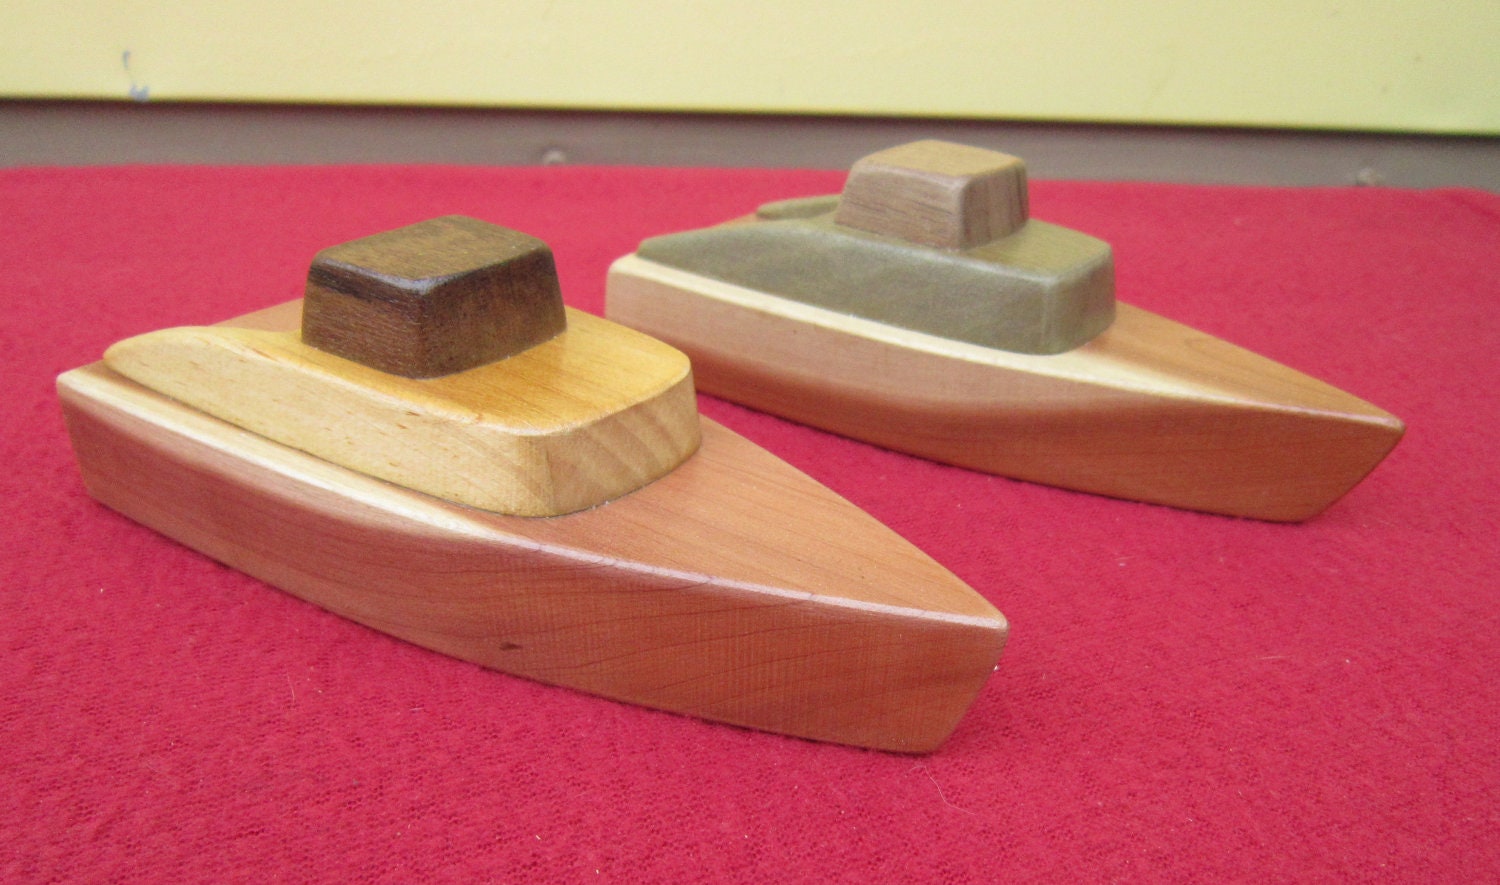 How to make a toy wooden boat that floats